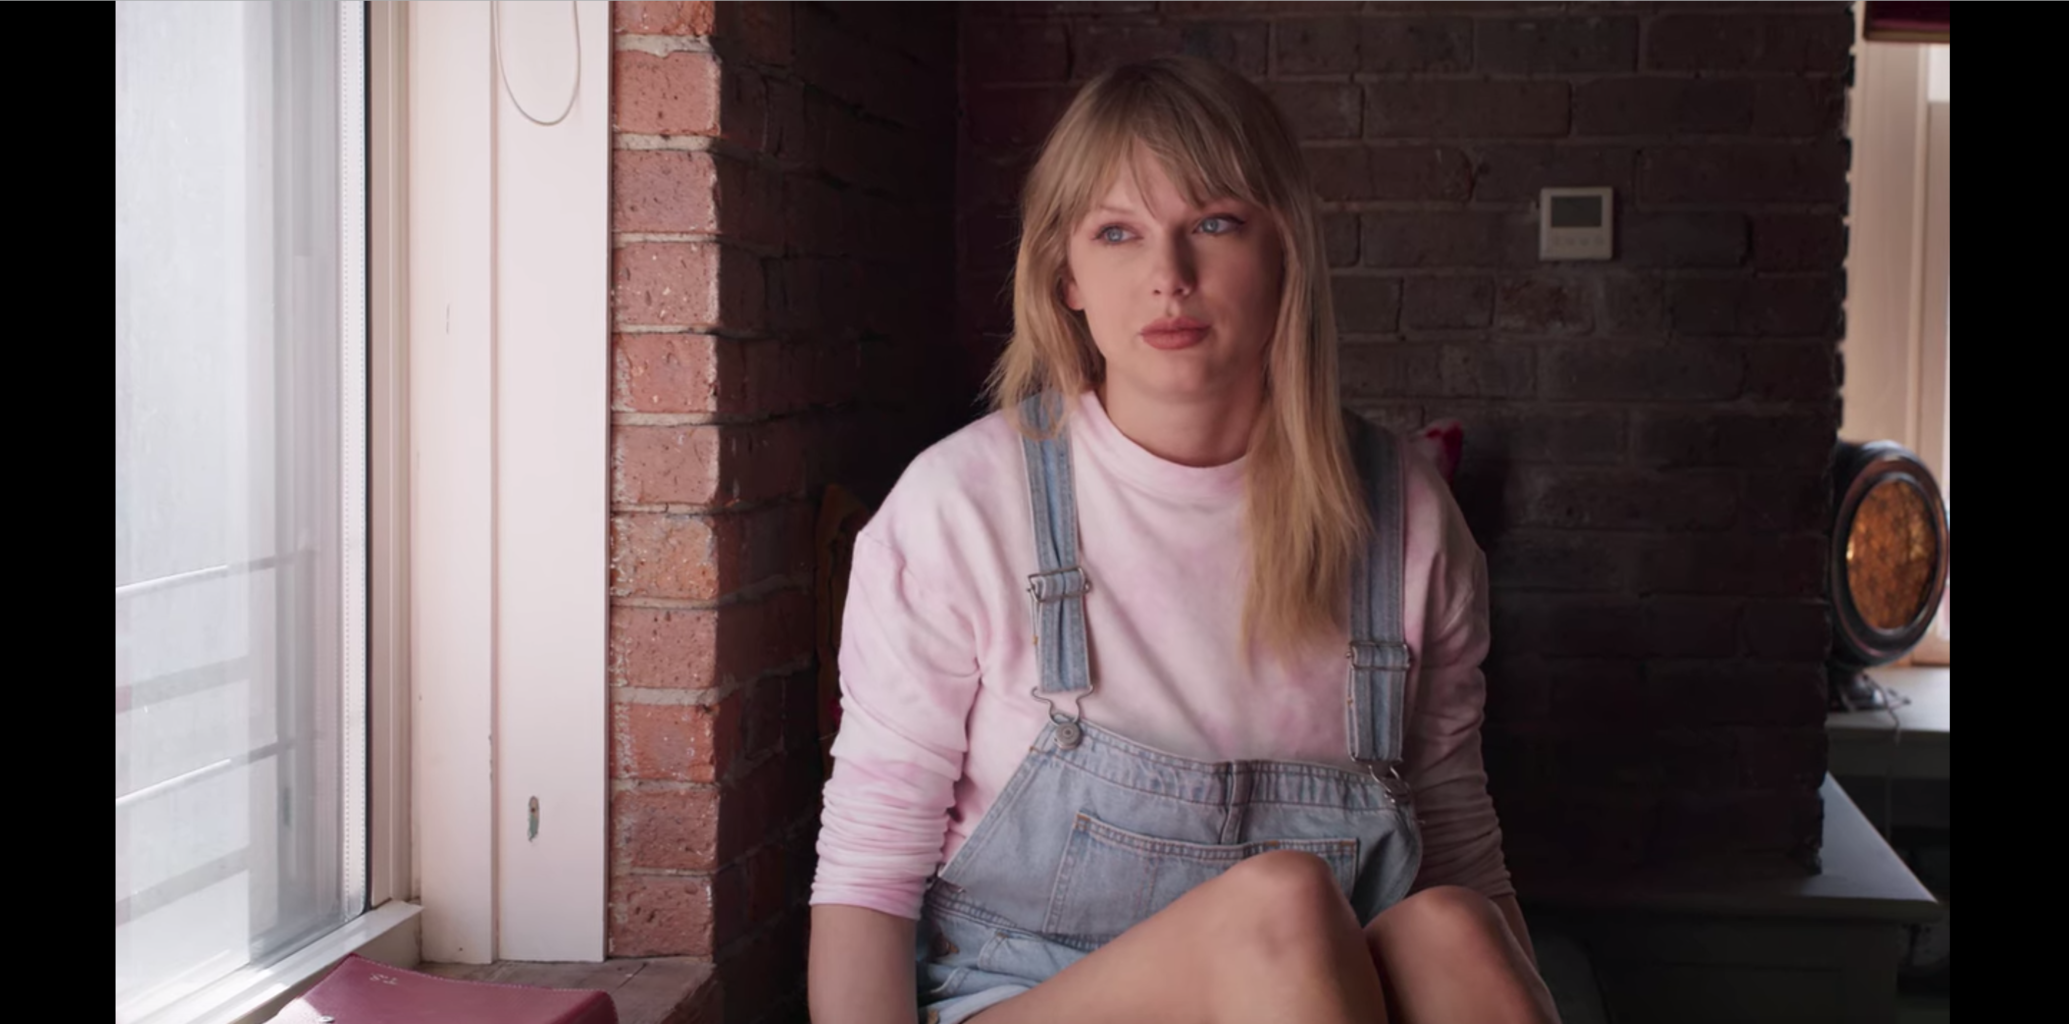 Taylor Swift in Miss Americana wearing a pink sweatshirt and overall shorts